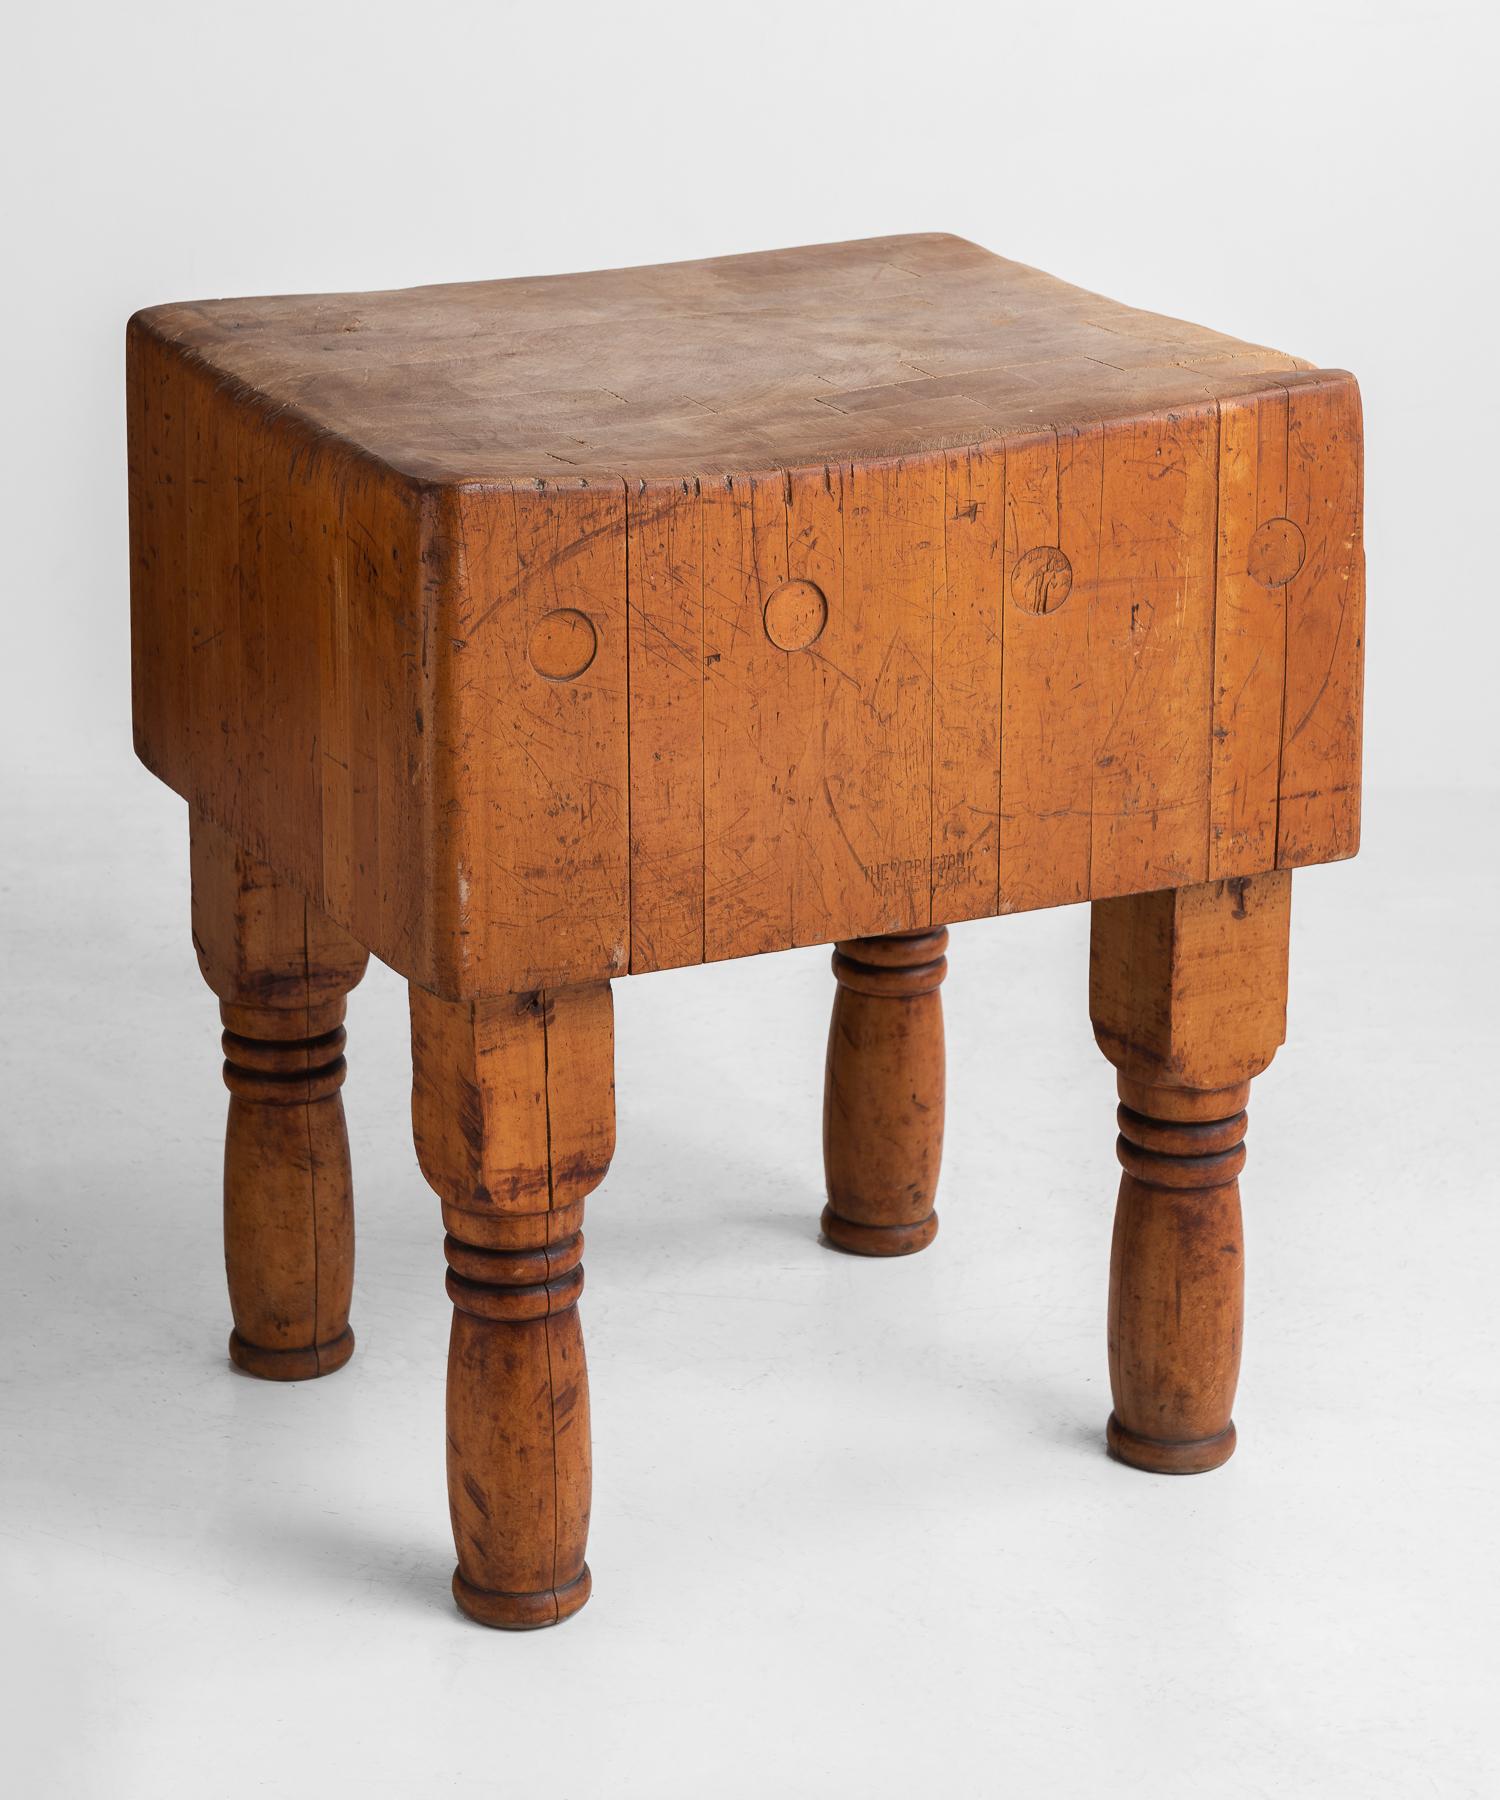 Butcher block, circa 1930.

Handsome form with heavily used slab top on turned legs.